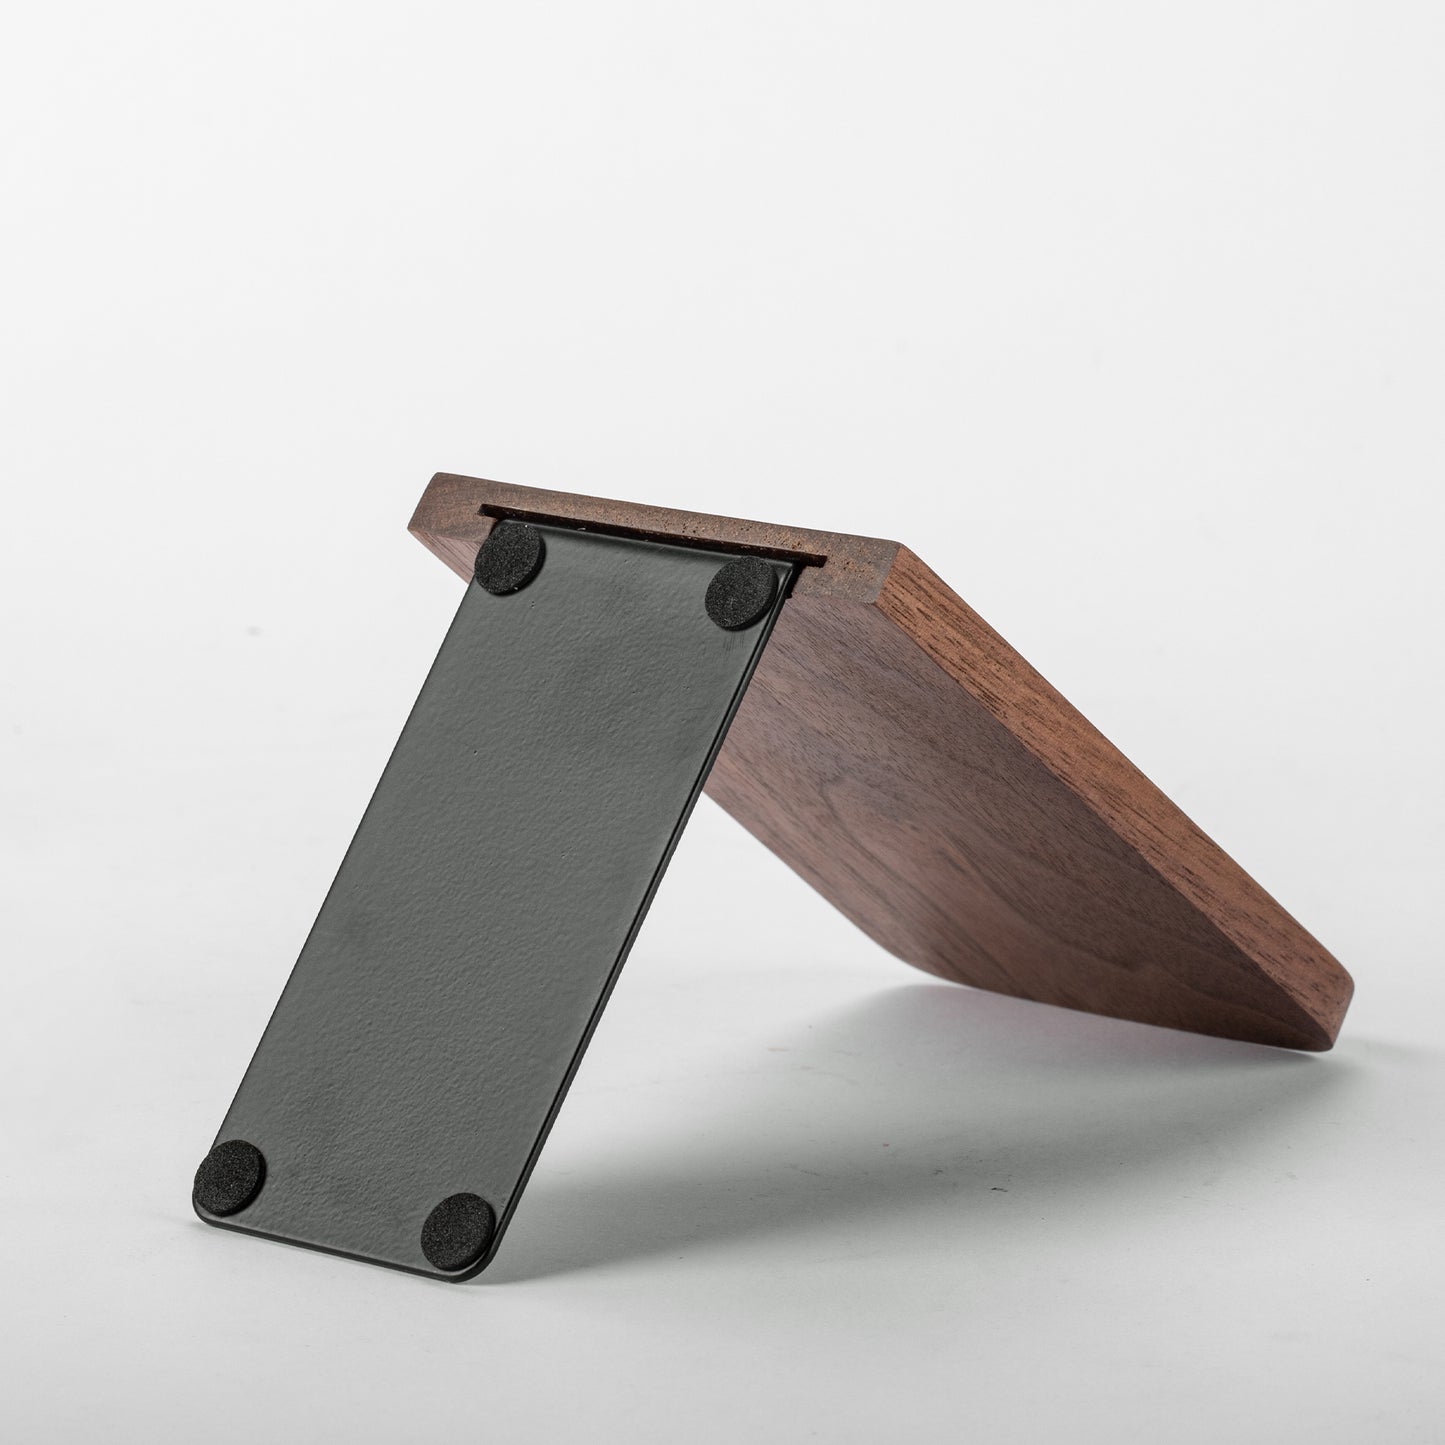 muso wood | Wooden Bookends for Shelves